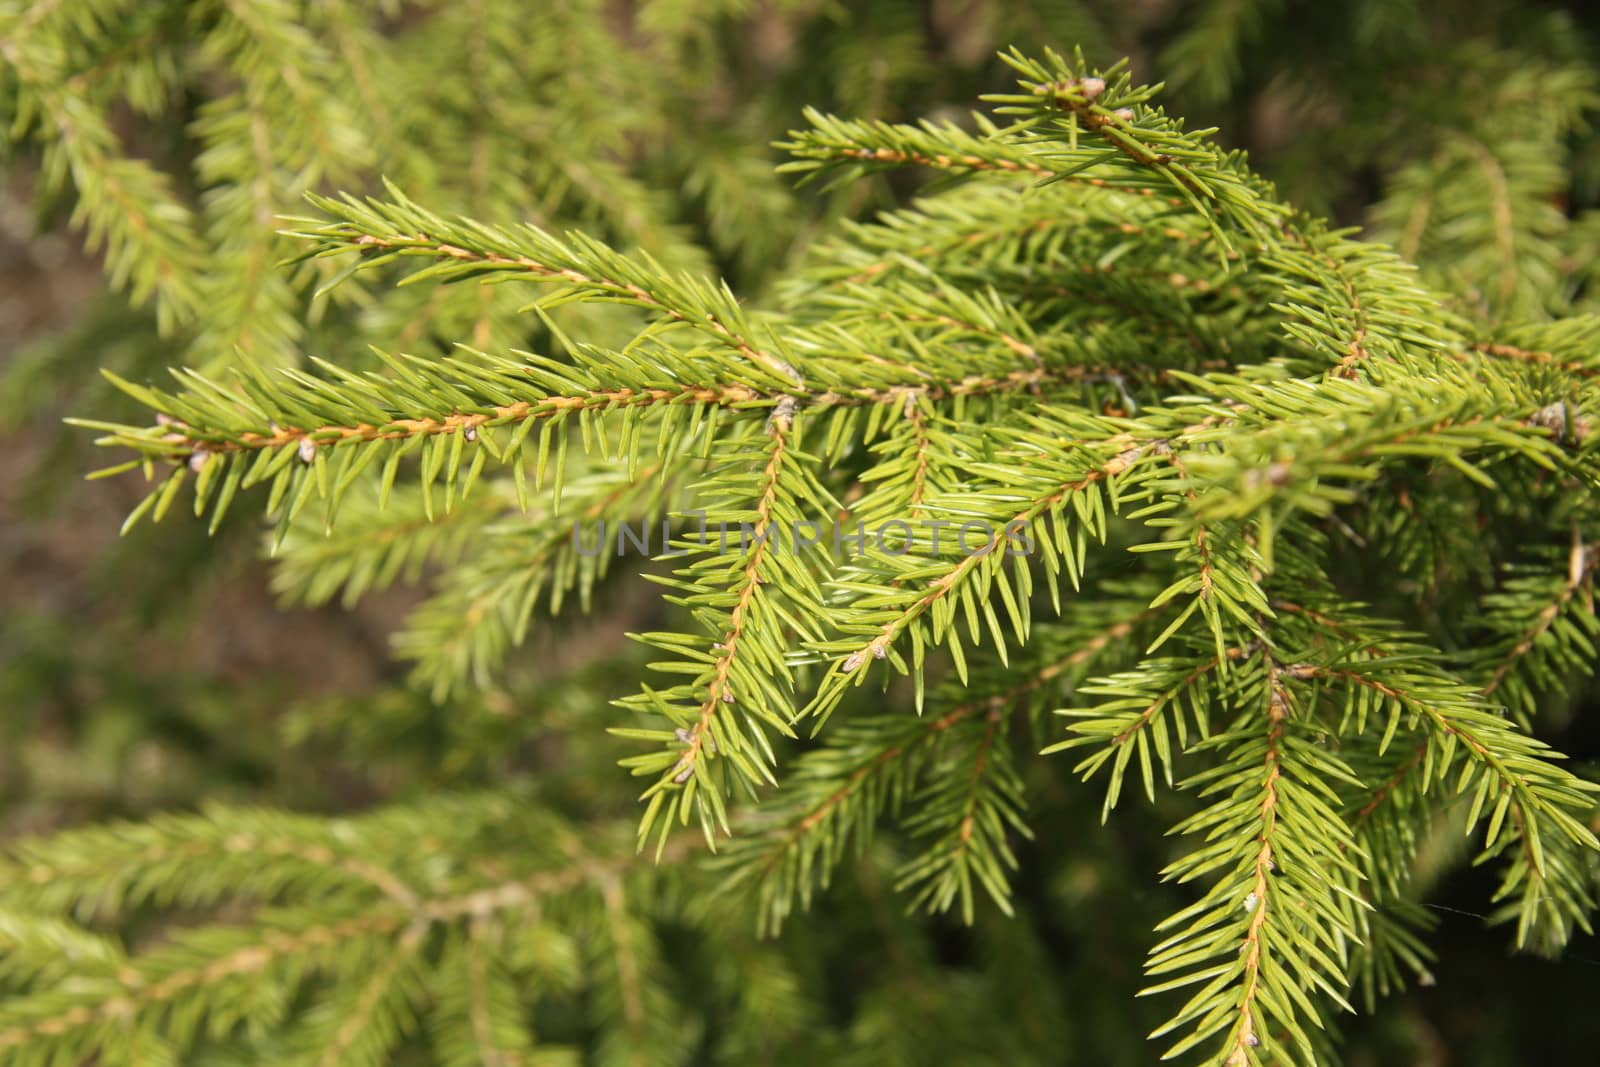 A background of a young green fir tree